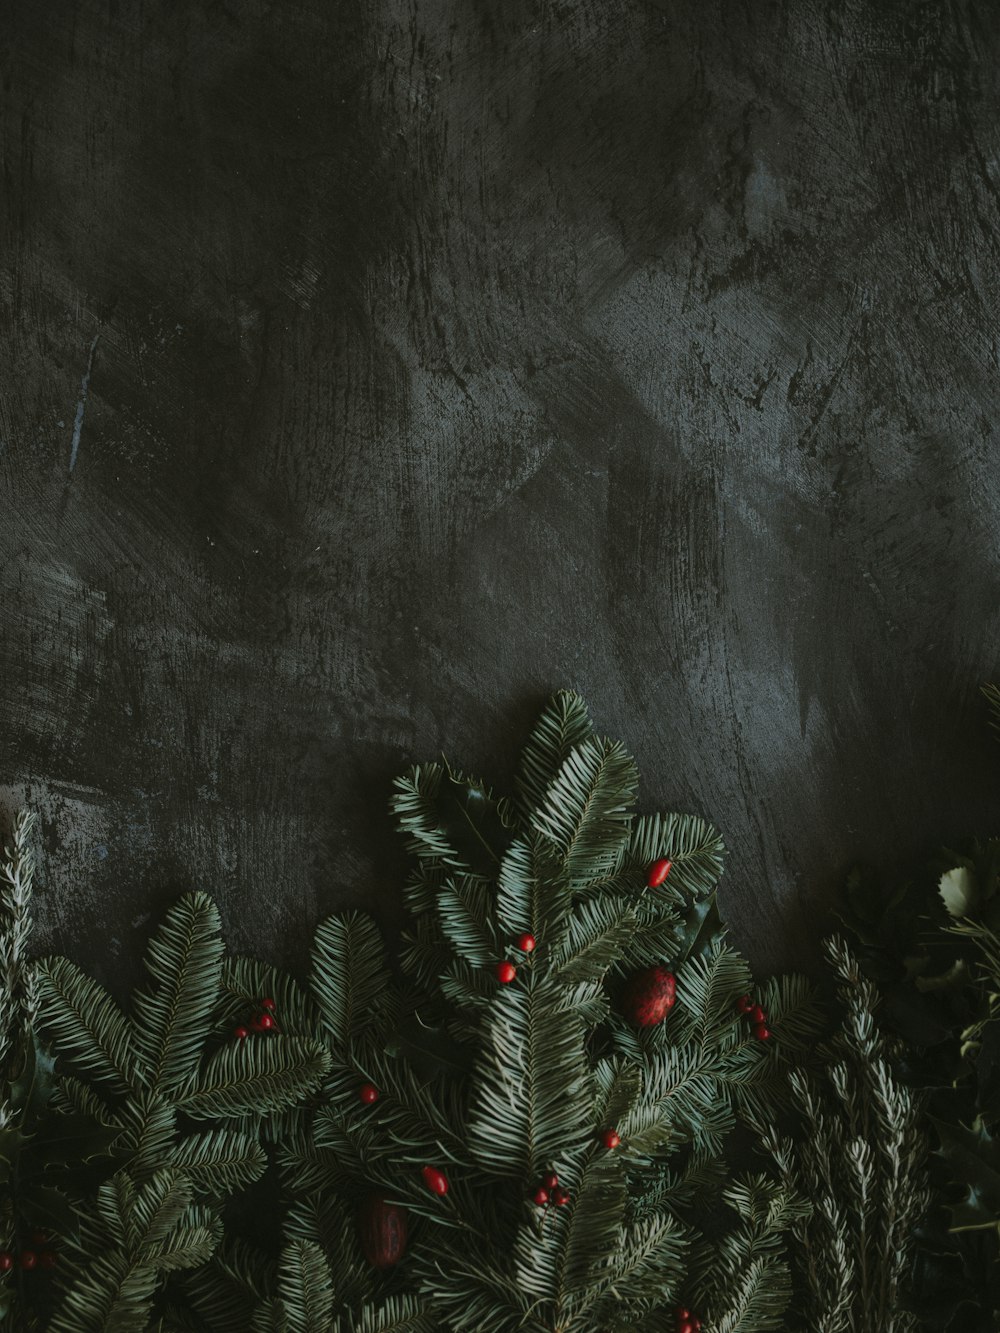 Dark Christmas Pictures | Download Free Images on Unsplash